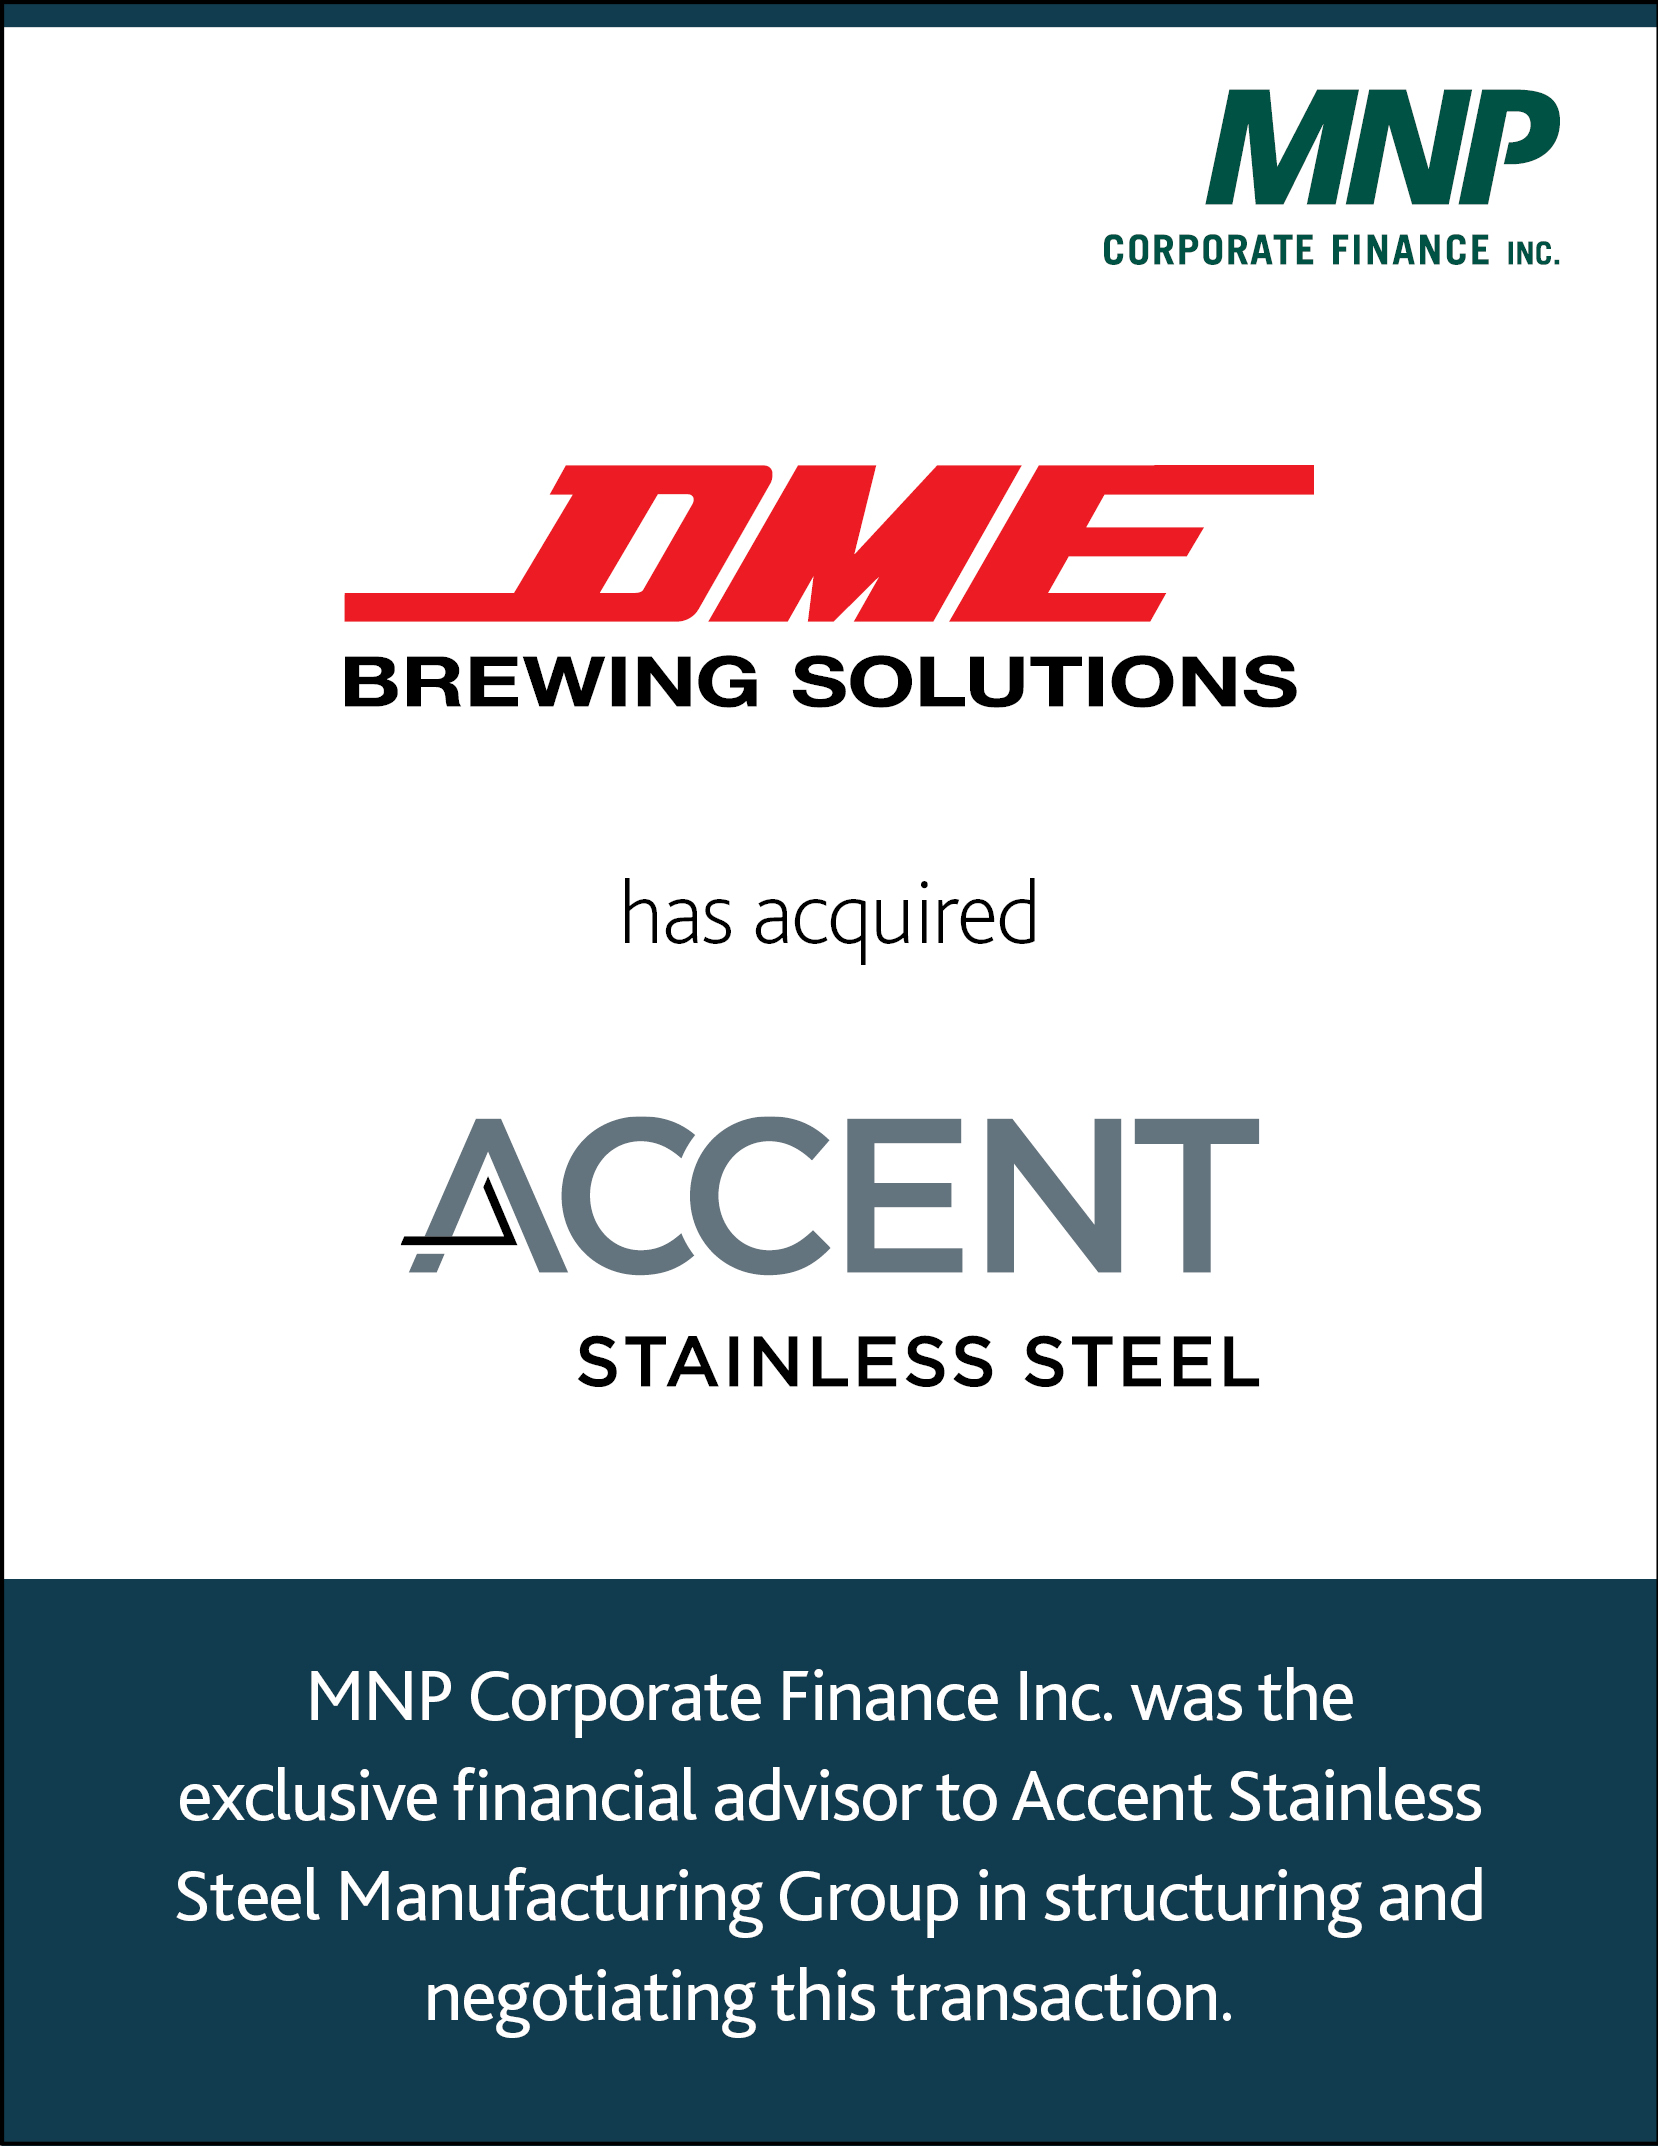 Diversified Metal Engineering LP has acquired Accent Stainless Steel Manufacturing Group.